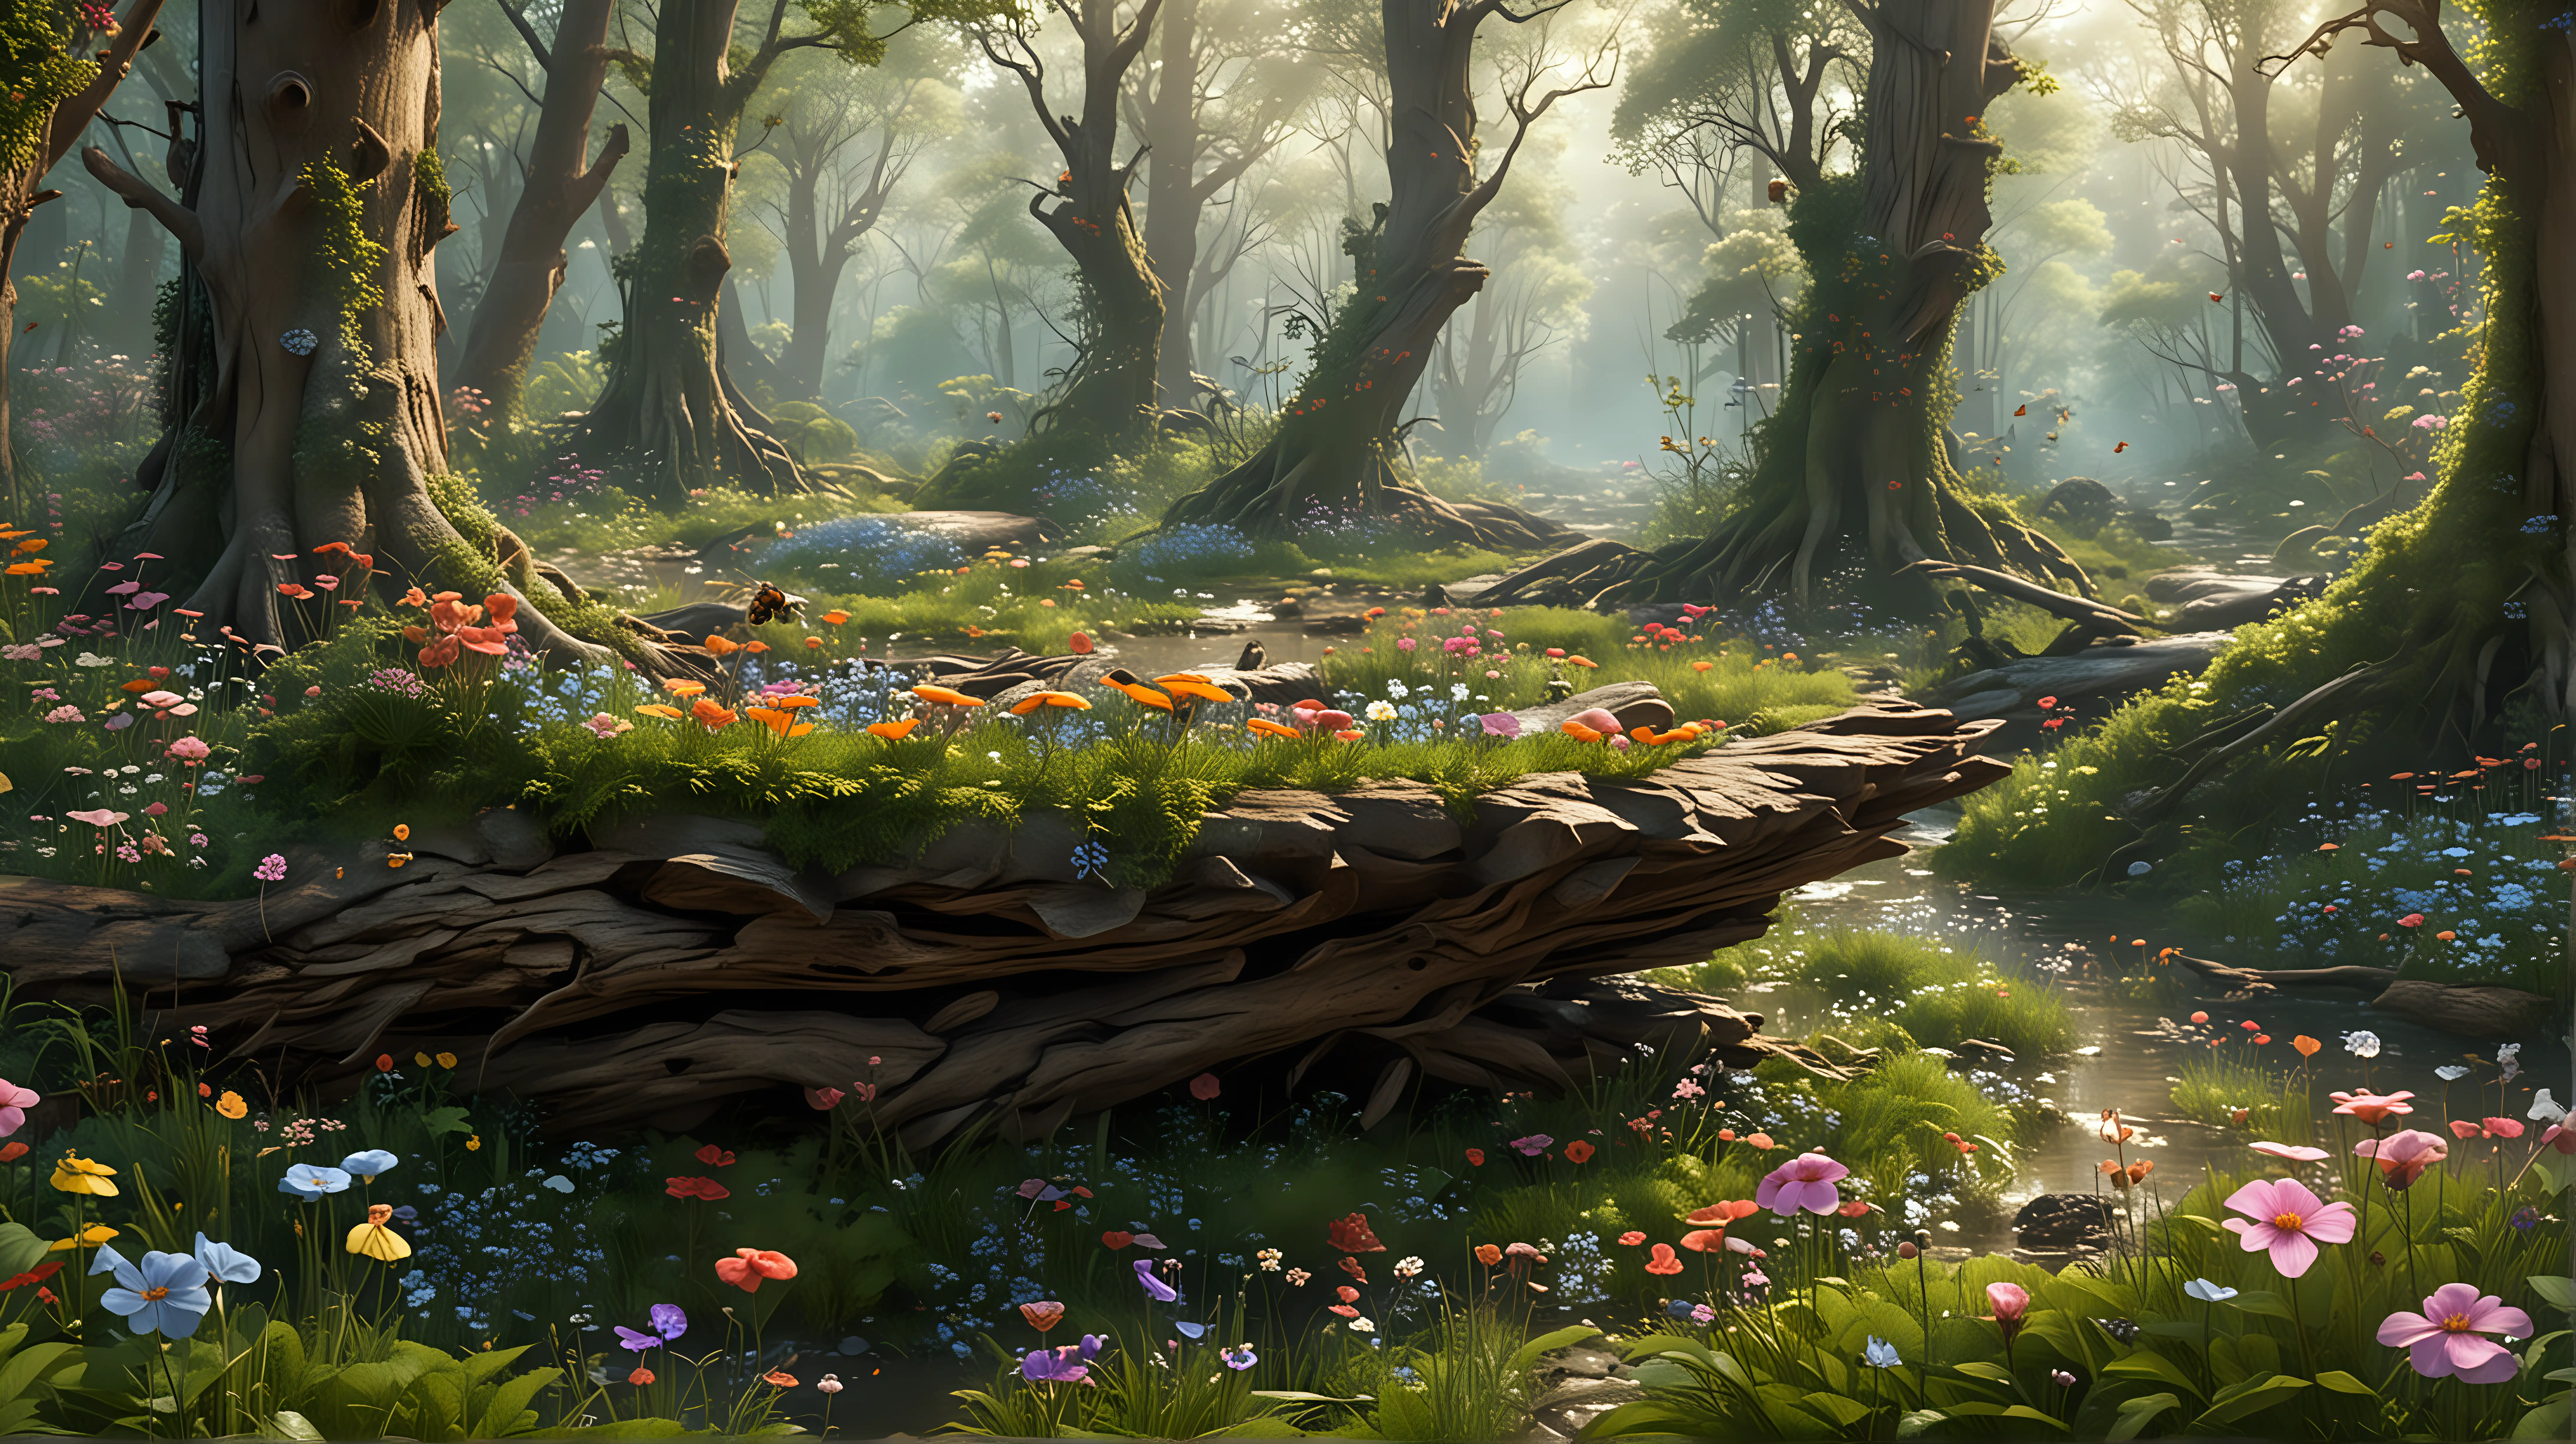 Enchanting HyperRealistic Fantasy Forest Scene with Fairy Creatures and Hidden Abodes